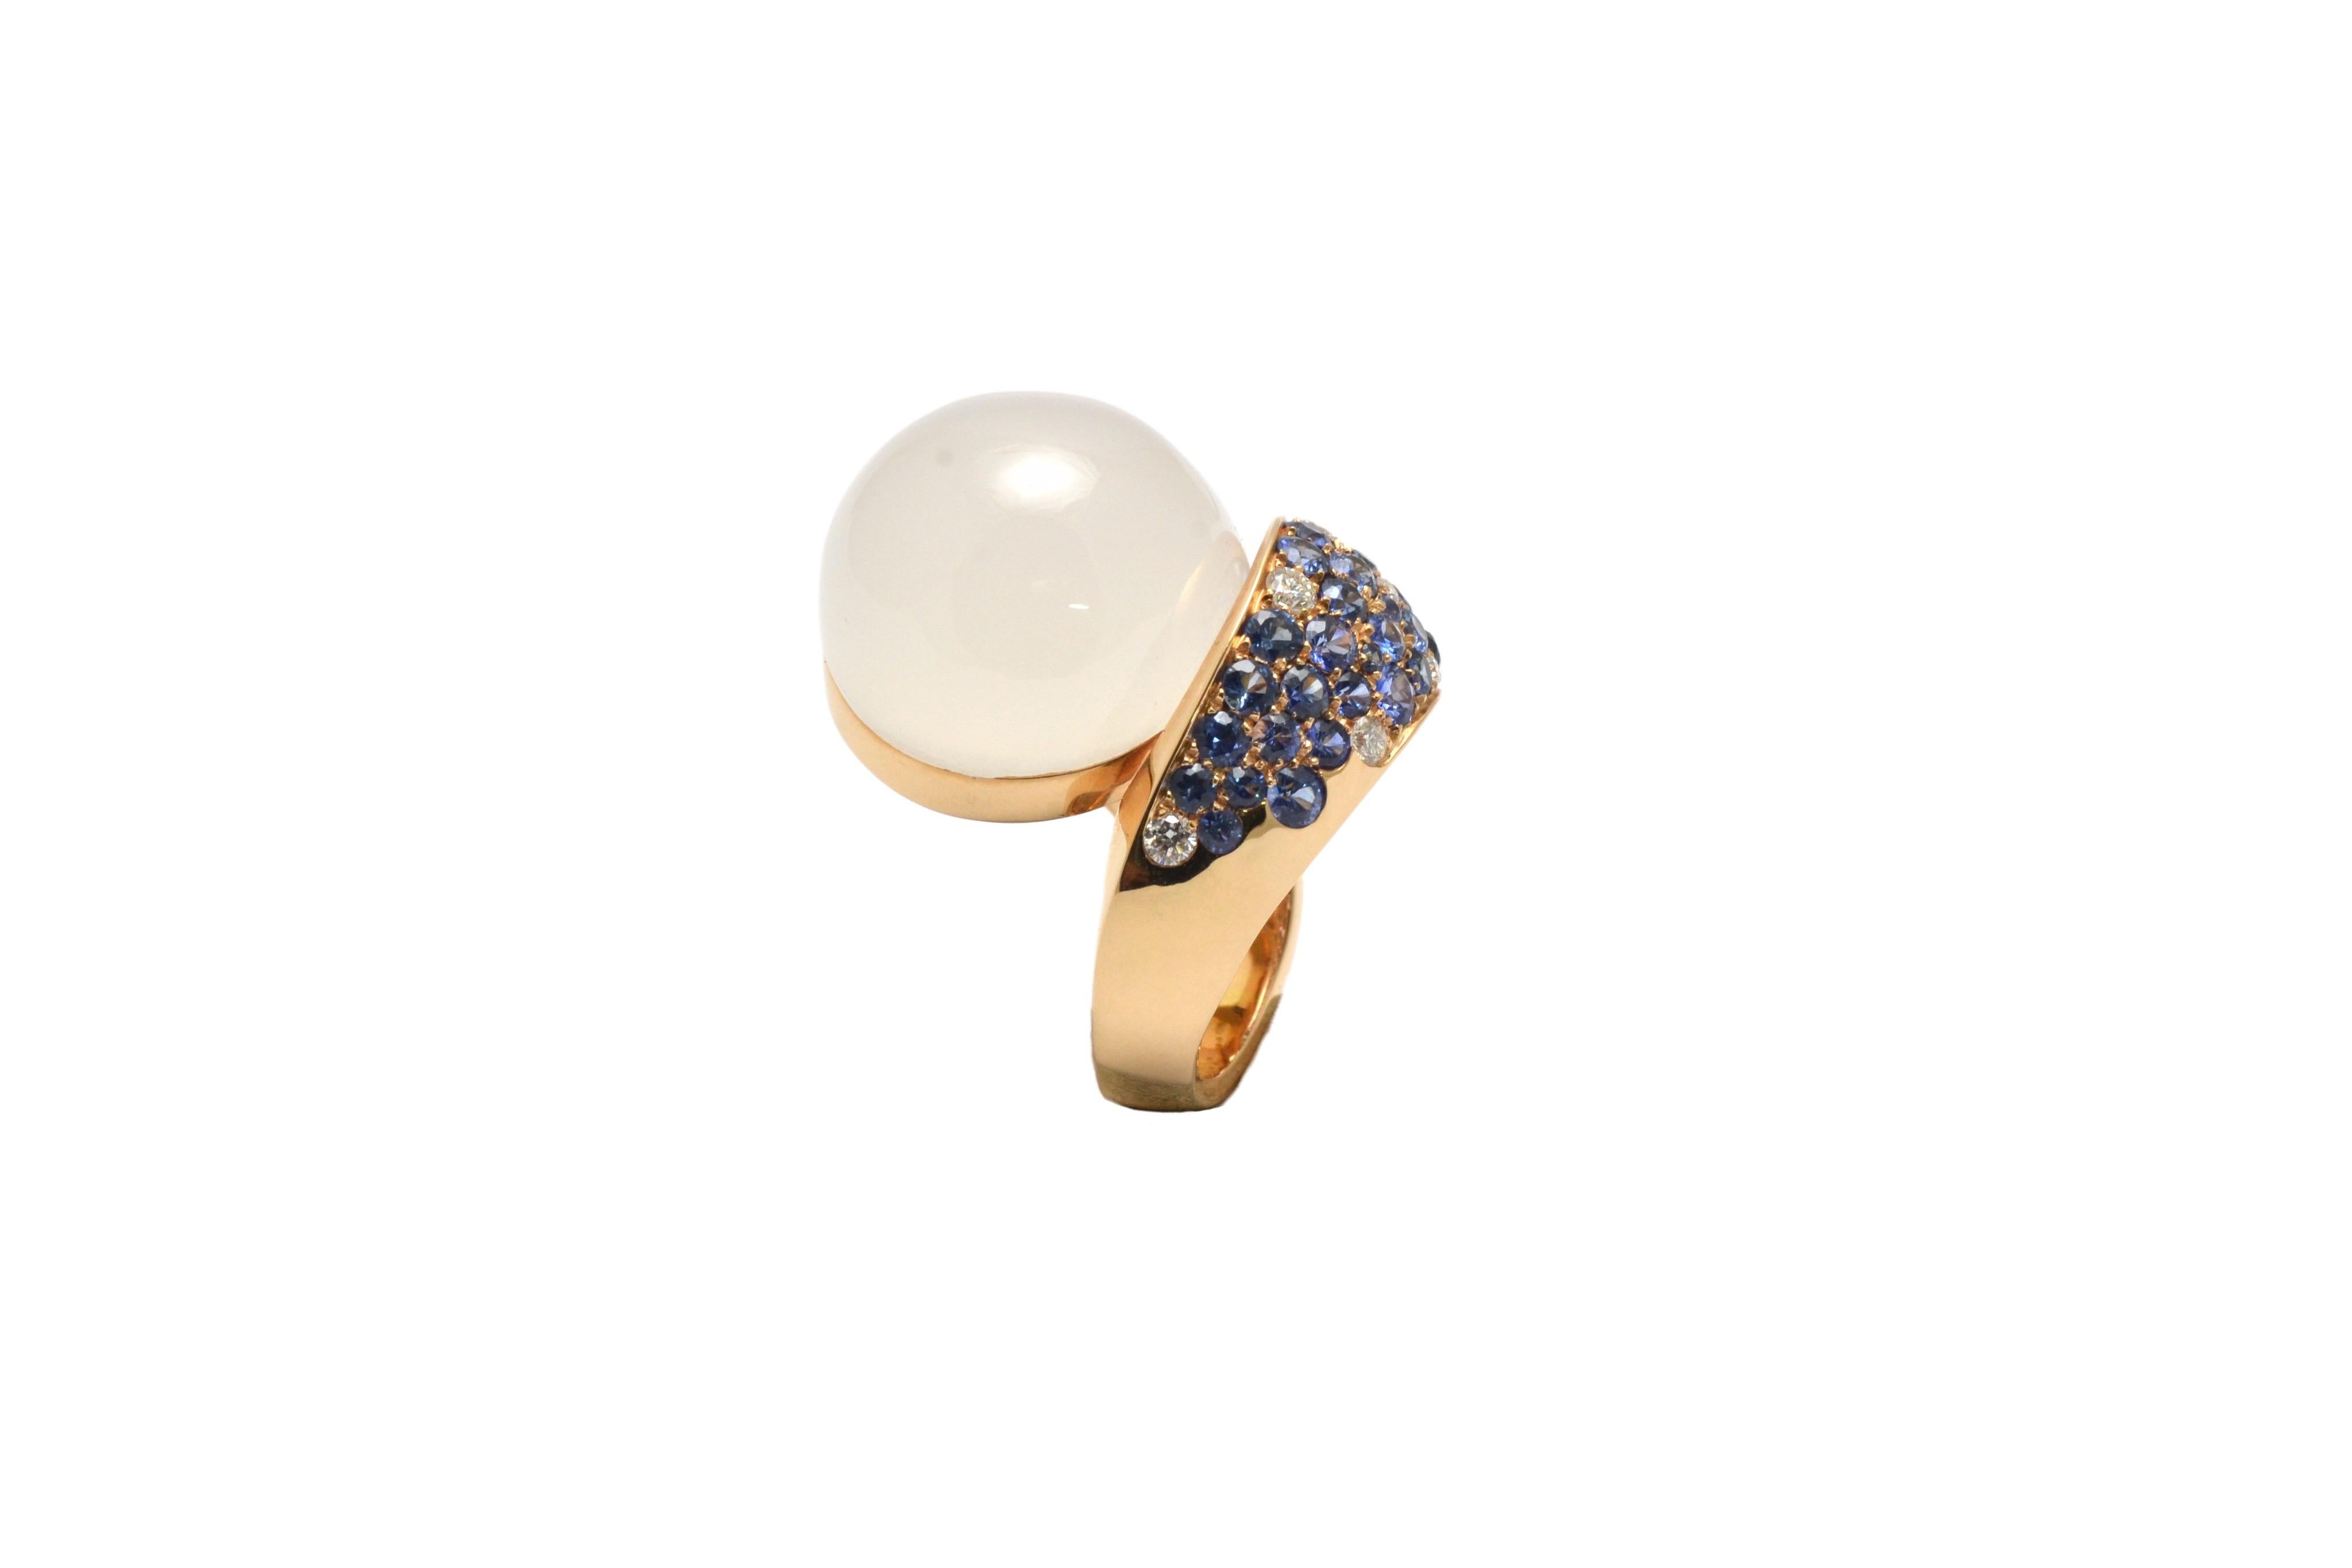 Round Cut Diamond Blue Sapphire White Quartz 18 KT Rose Gold Made in Italy Moony Ring For Sale